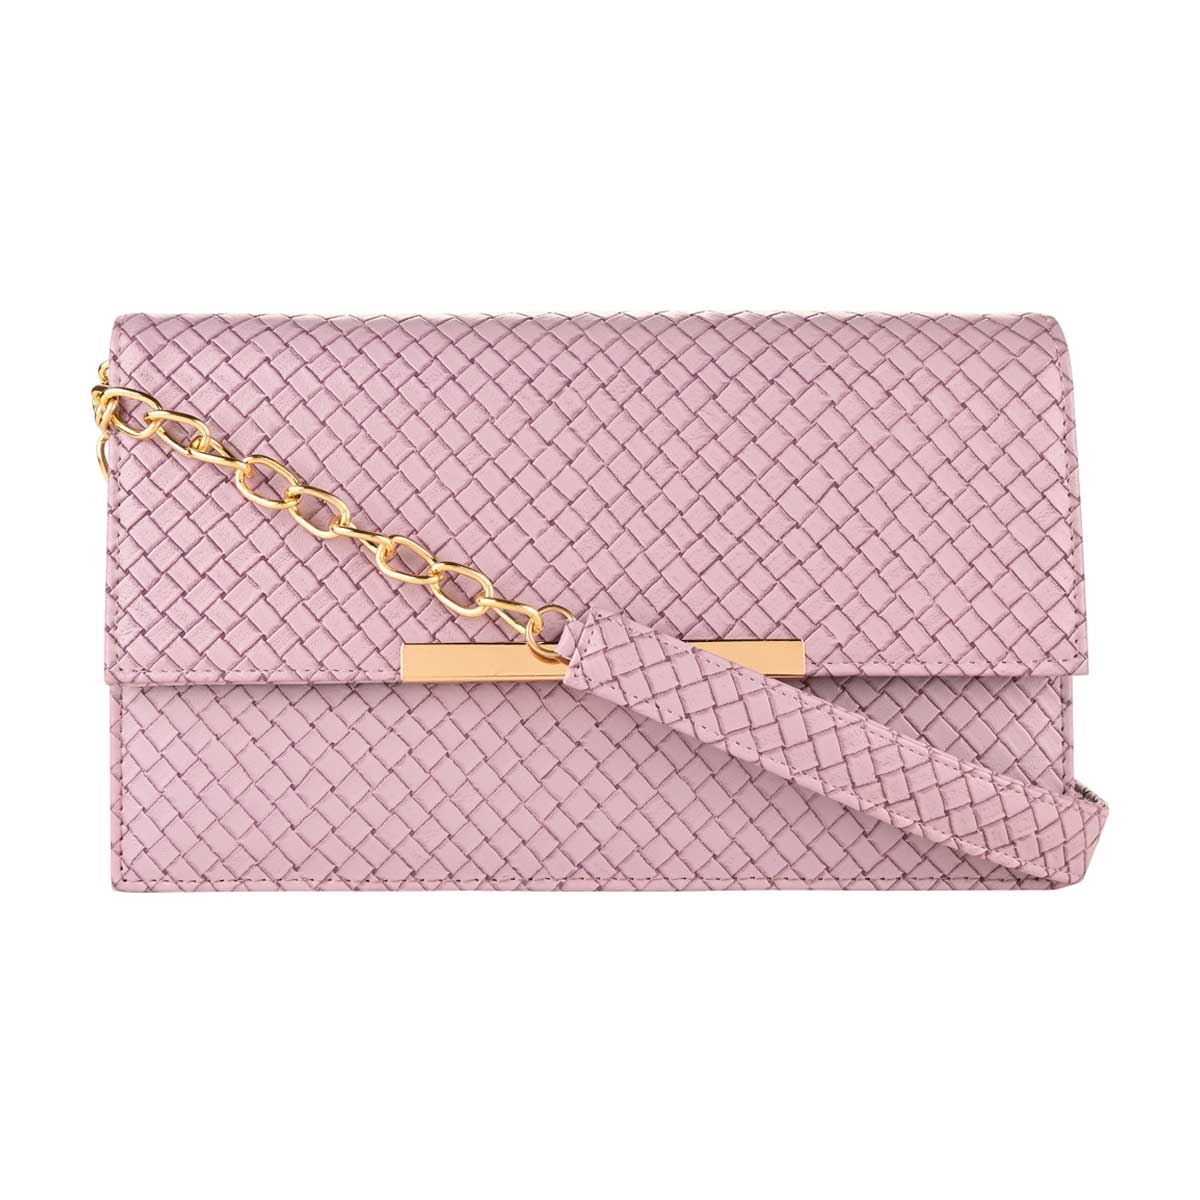 Rocia Purple Textured Bag With Long Sling Chain